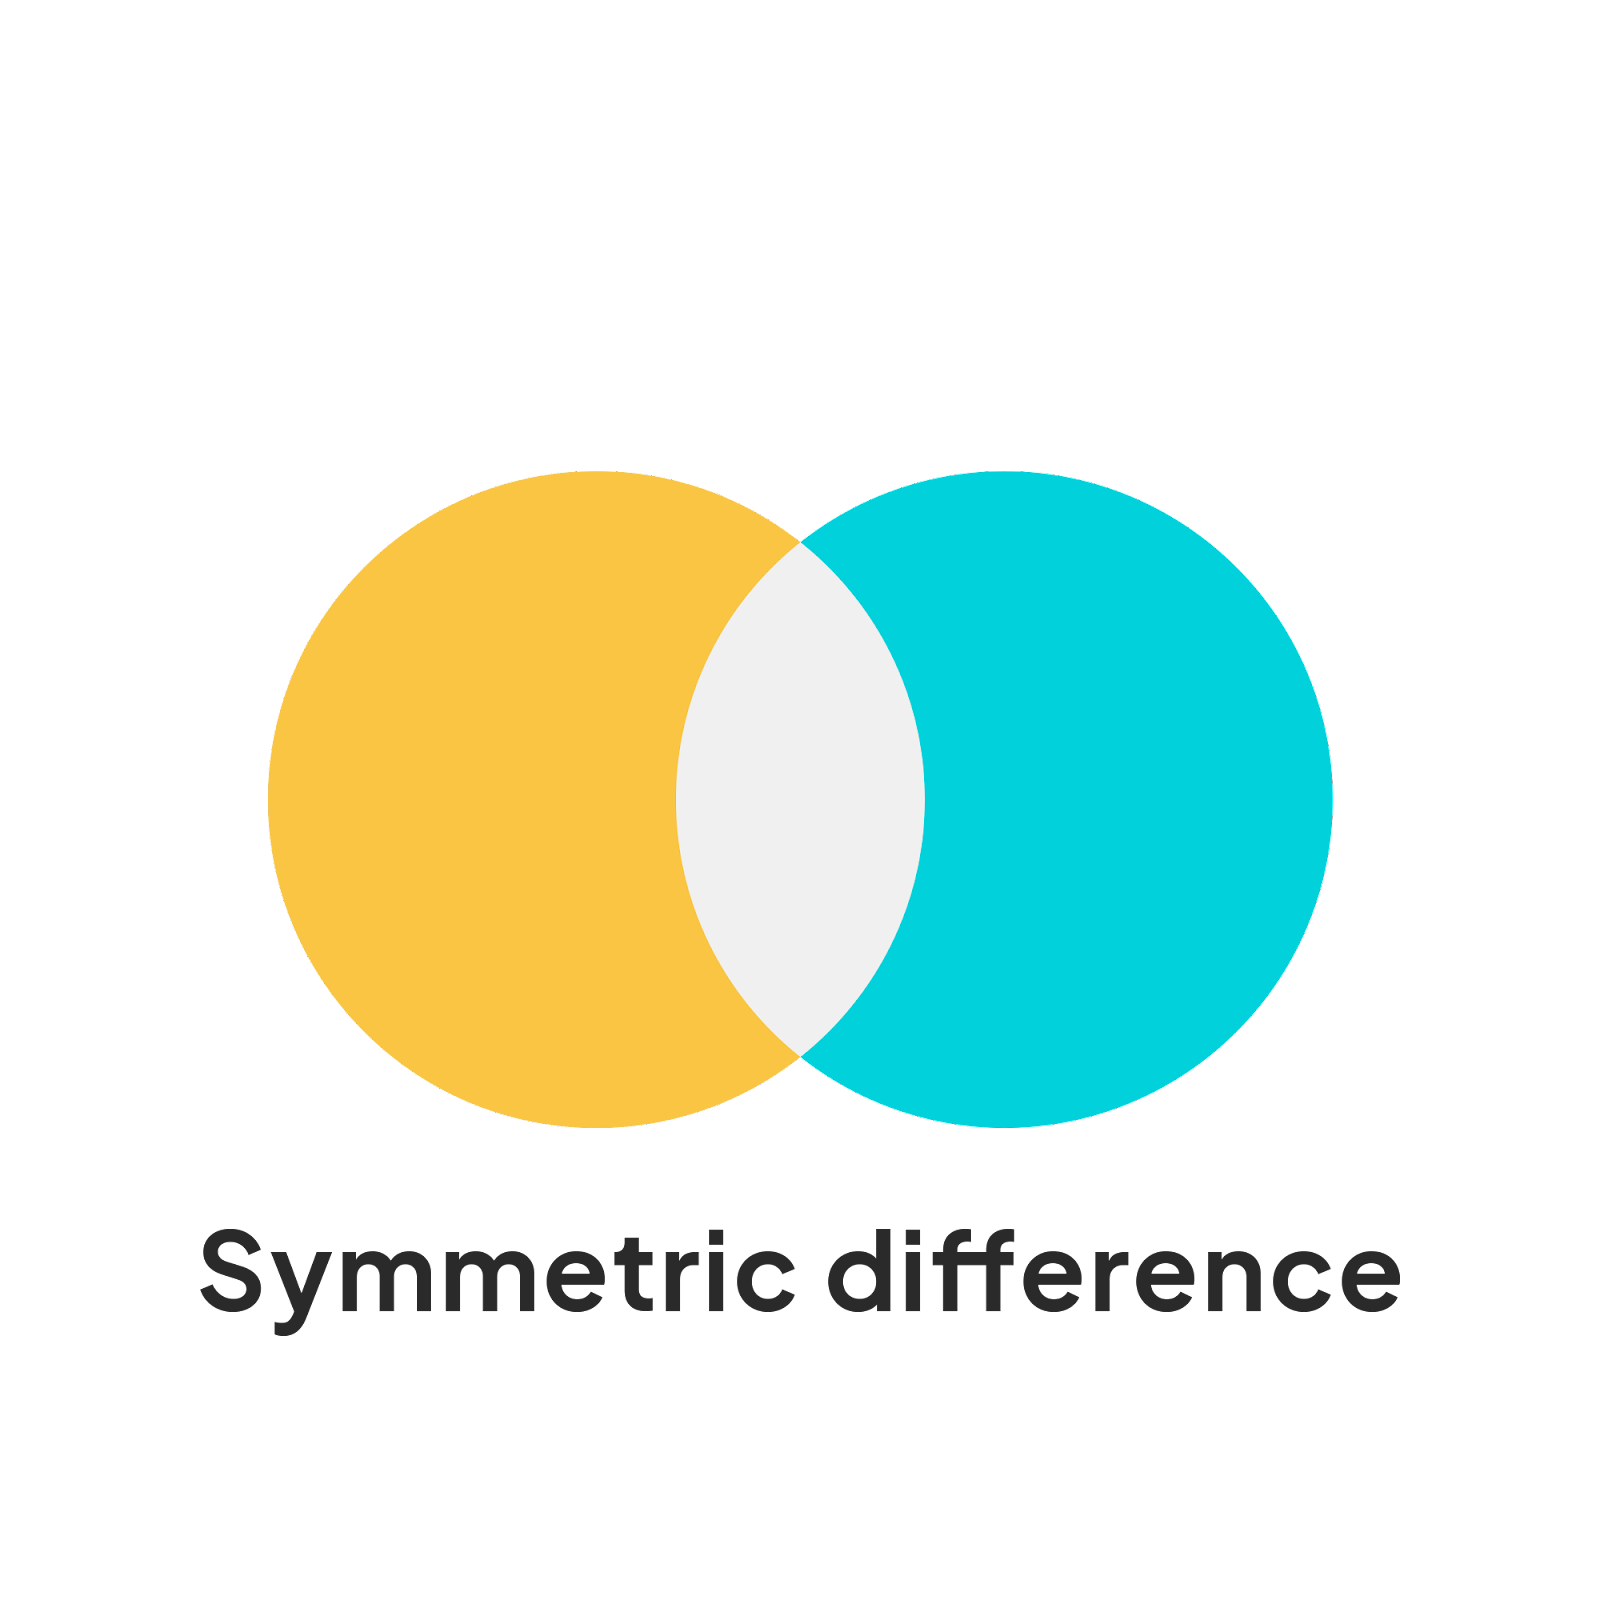 Symmetric difference